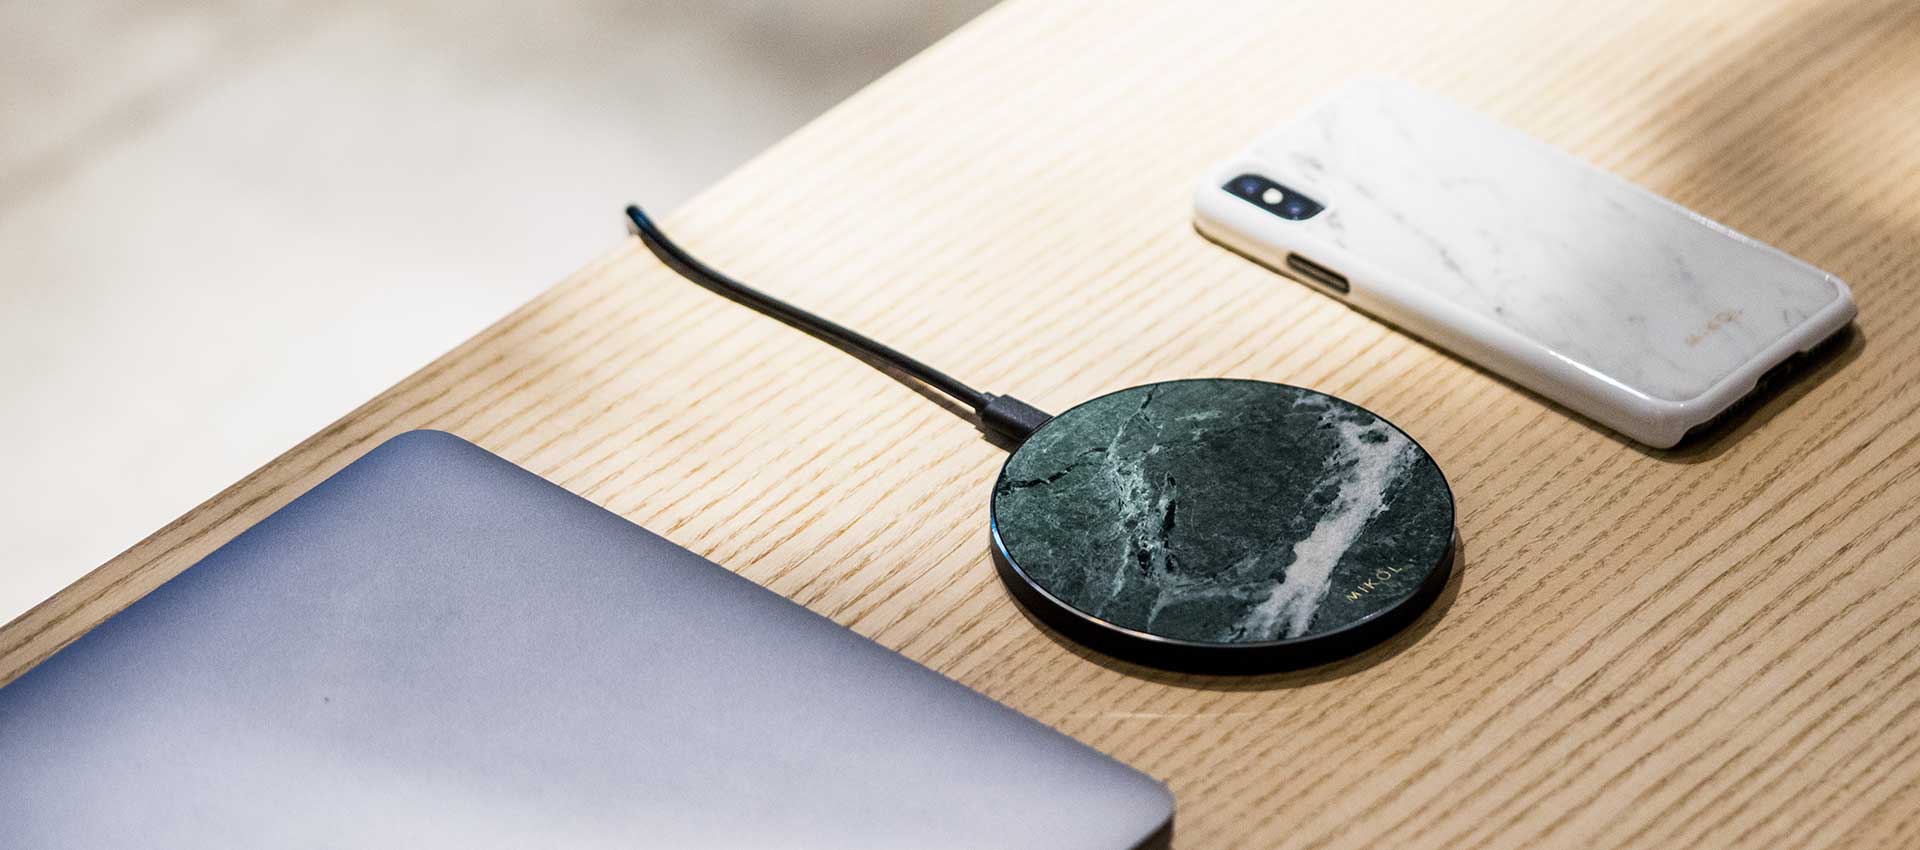 Charge Your iPhone Easily With Apple Wireless Charger-Latest Features And Designs Available In Pakistan!